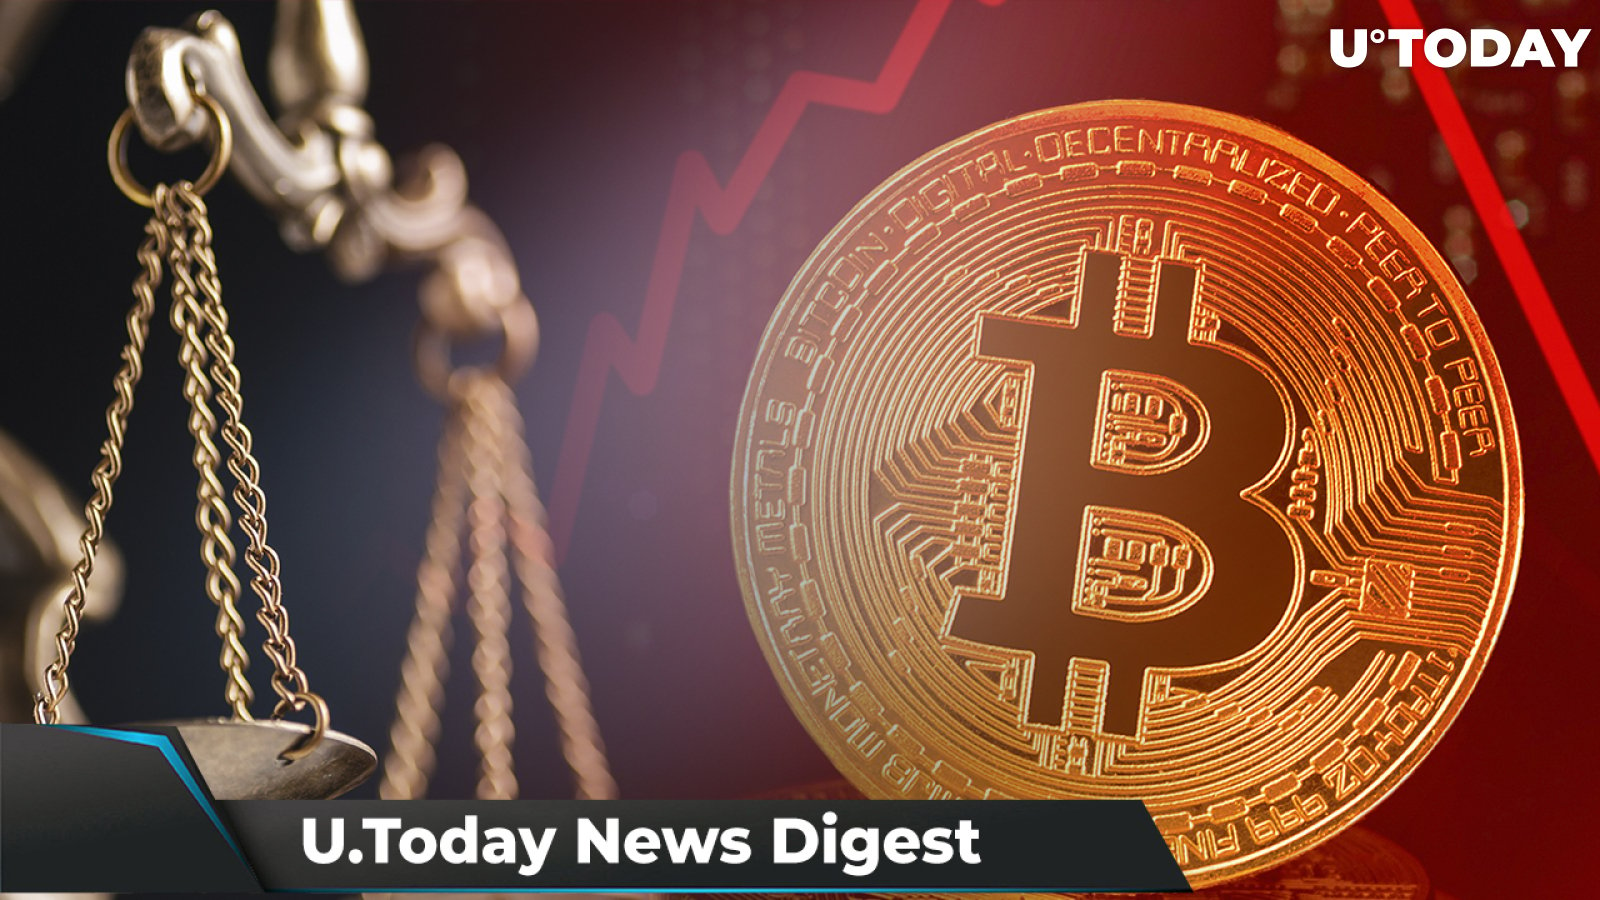 BTC May Not Recover Until 2025, Ripple and SEC Face “Biggest Decision” in Case, Ancient ETH Whale Awakens: Crypto News Digest by U.Today